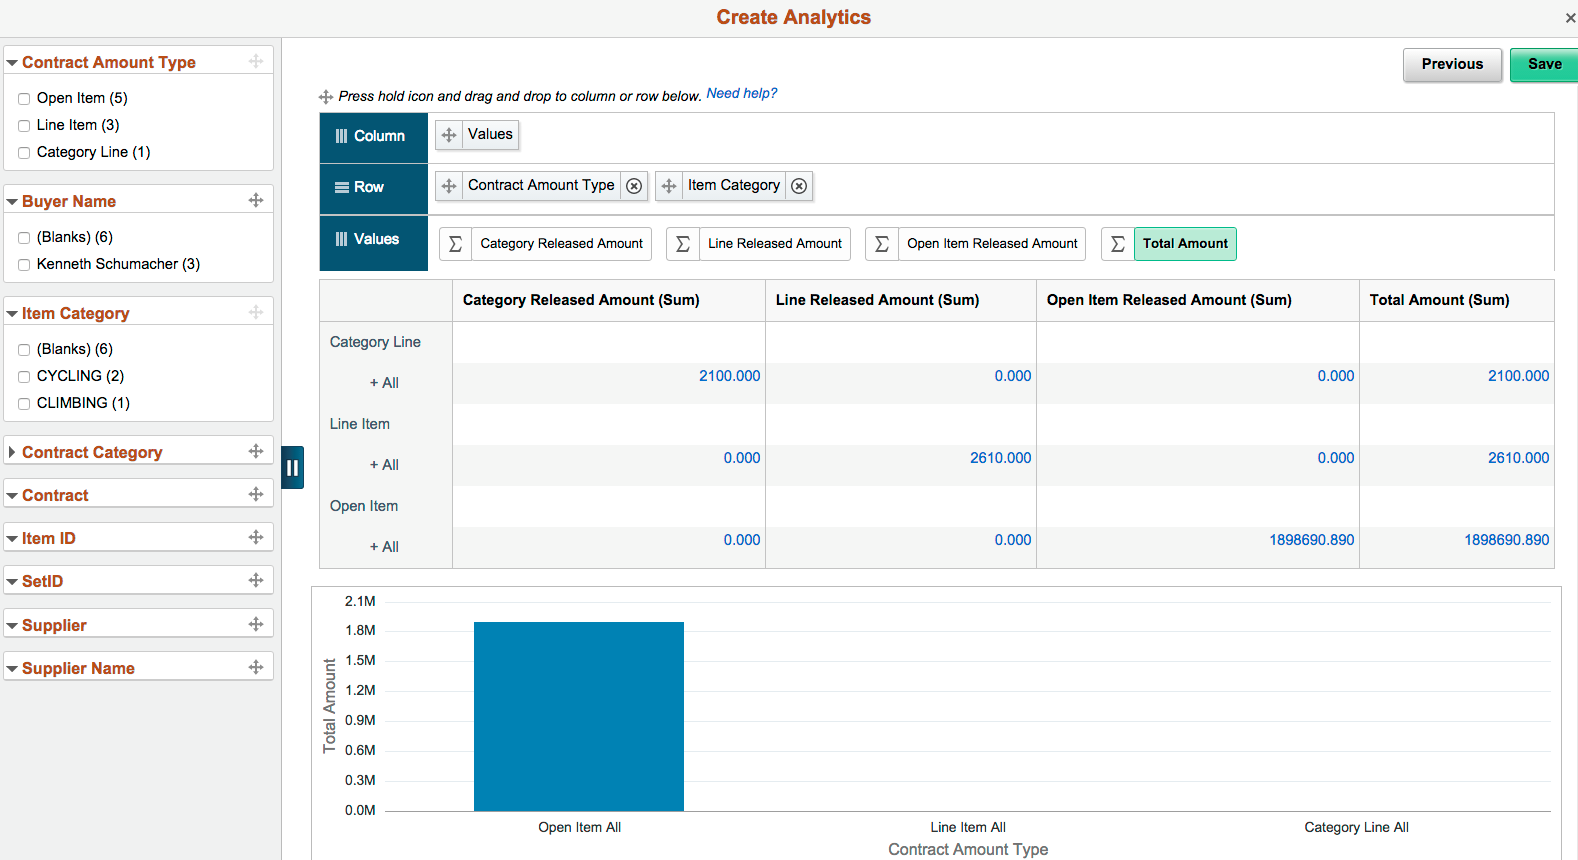 Create Analytics Wizard - step 3 - Total Amount by Category